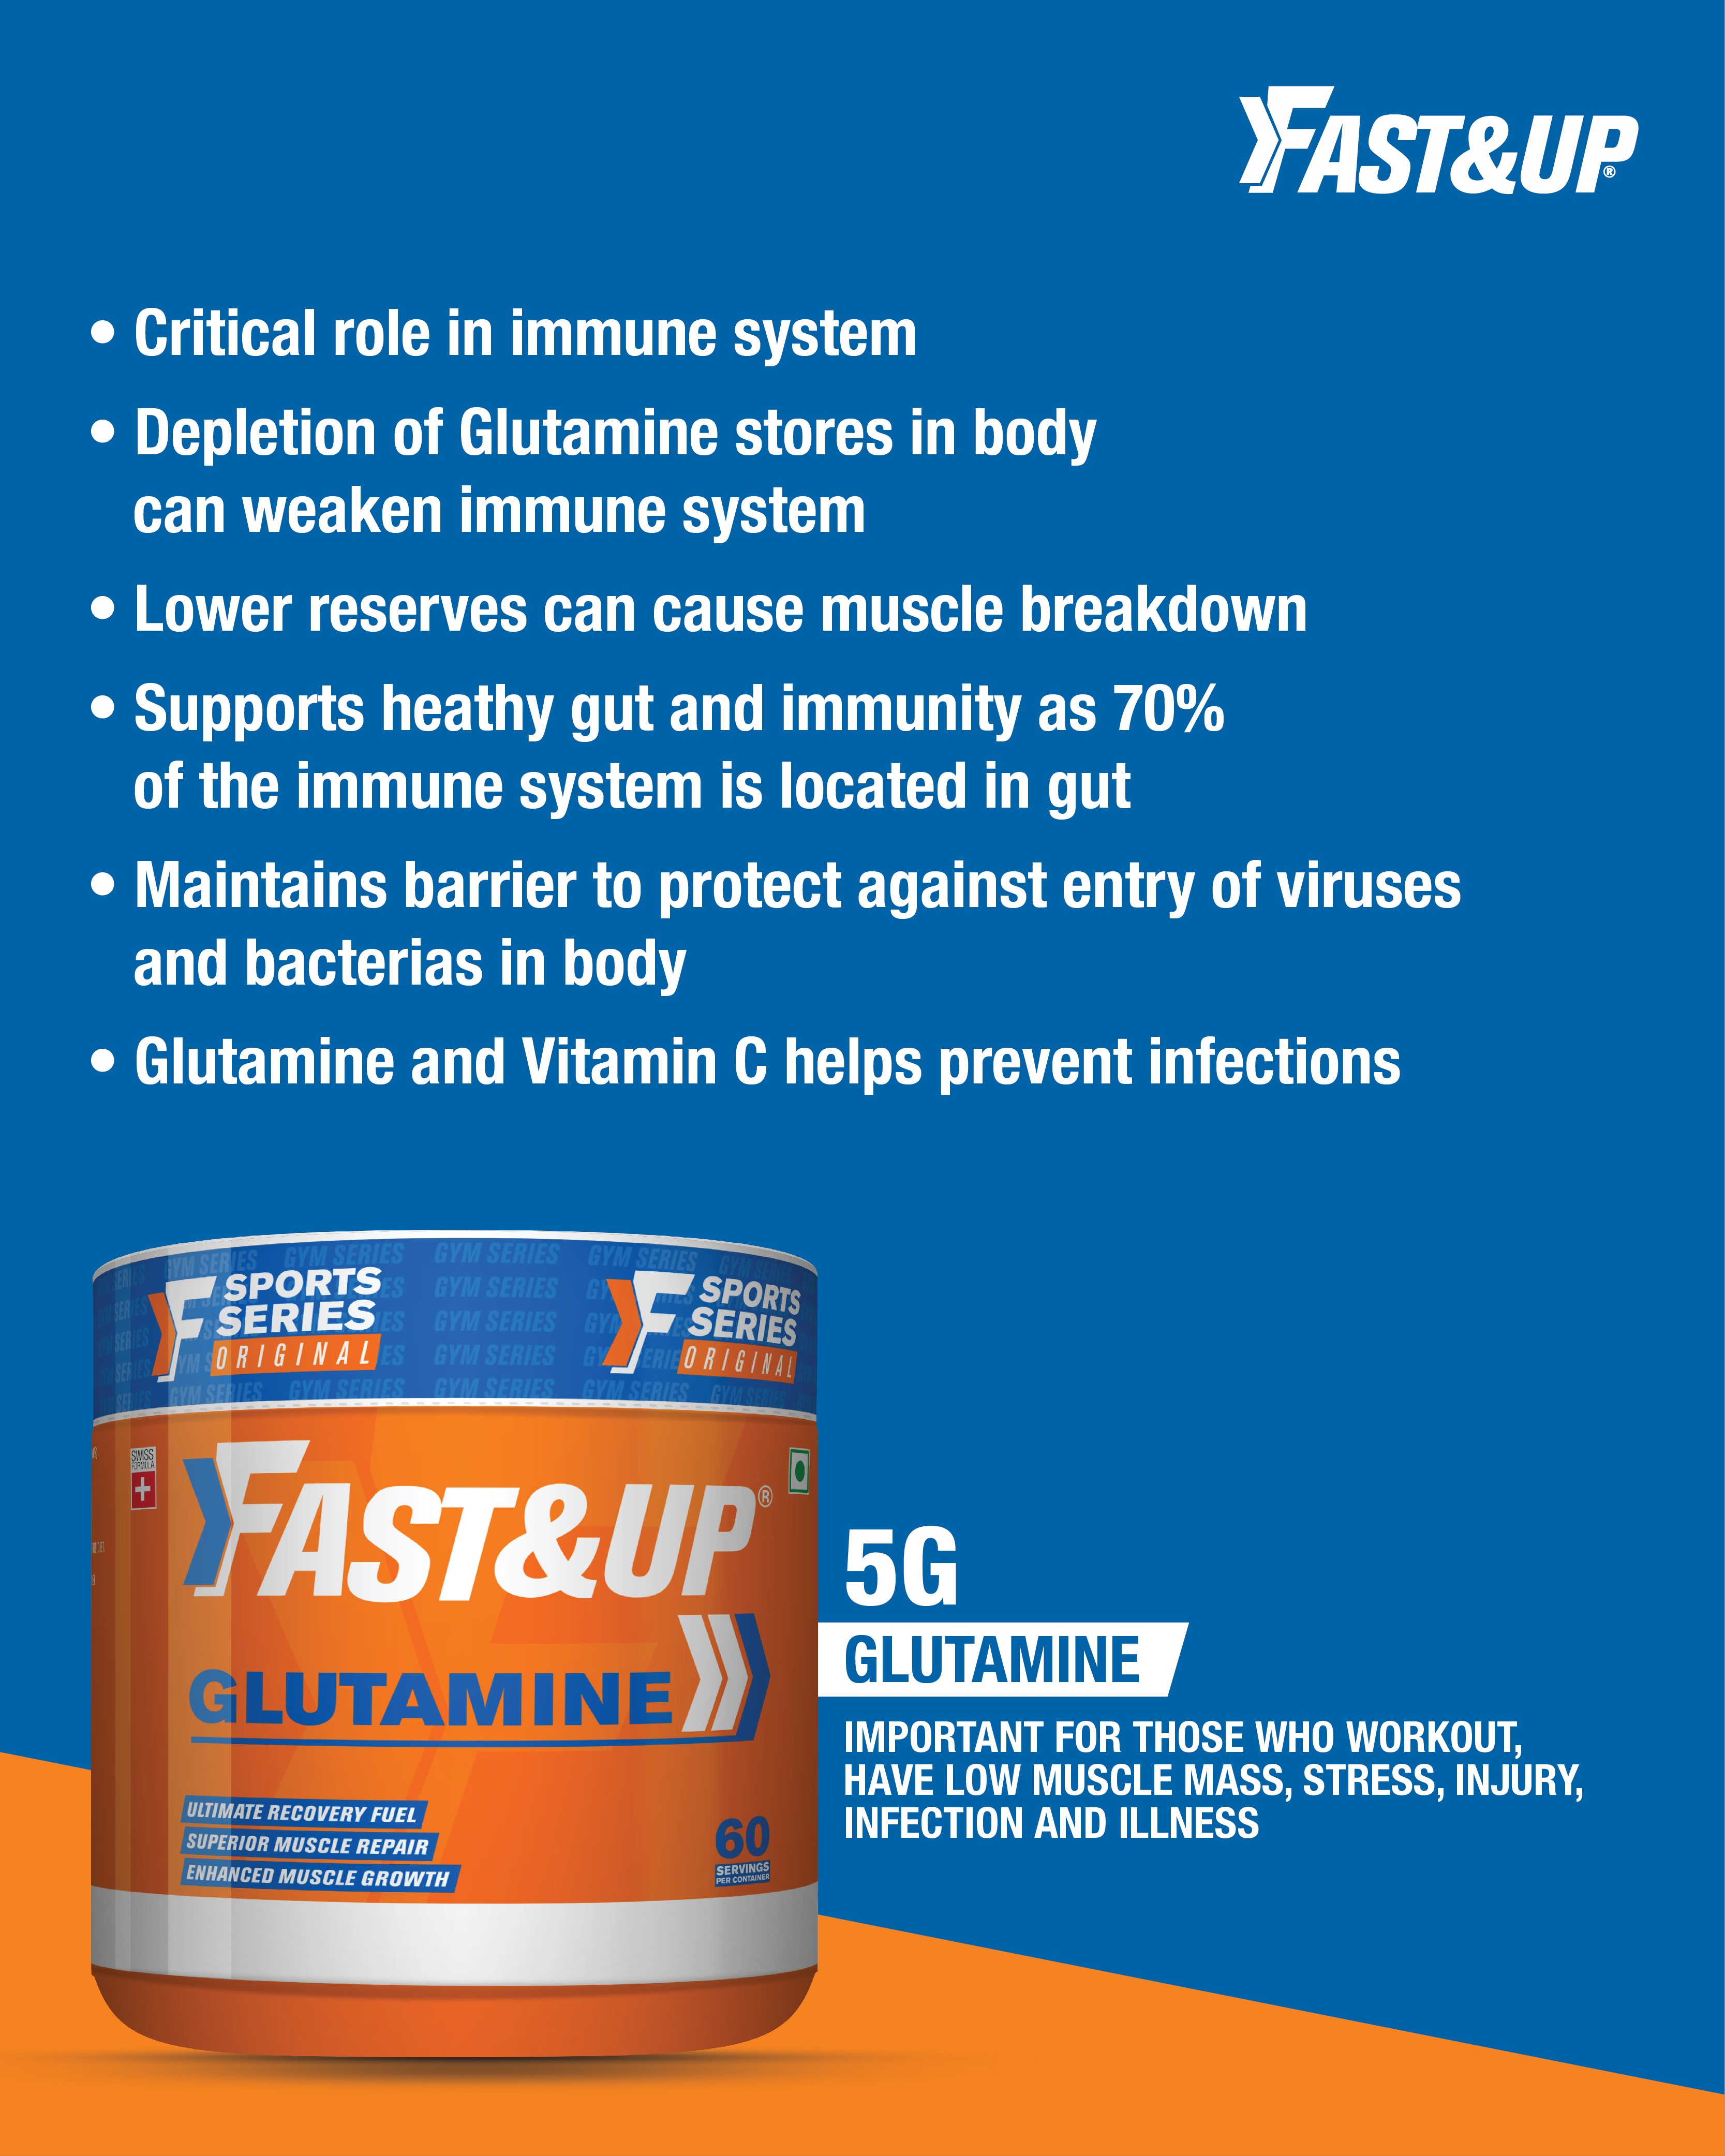 Fast&up Glutamine Supplements for Immunity